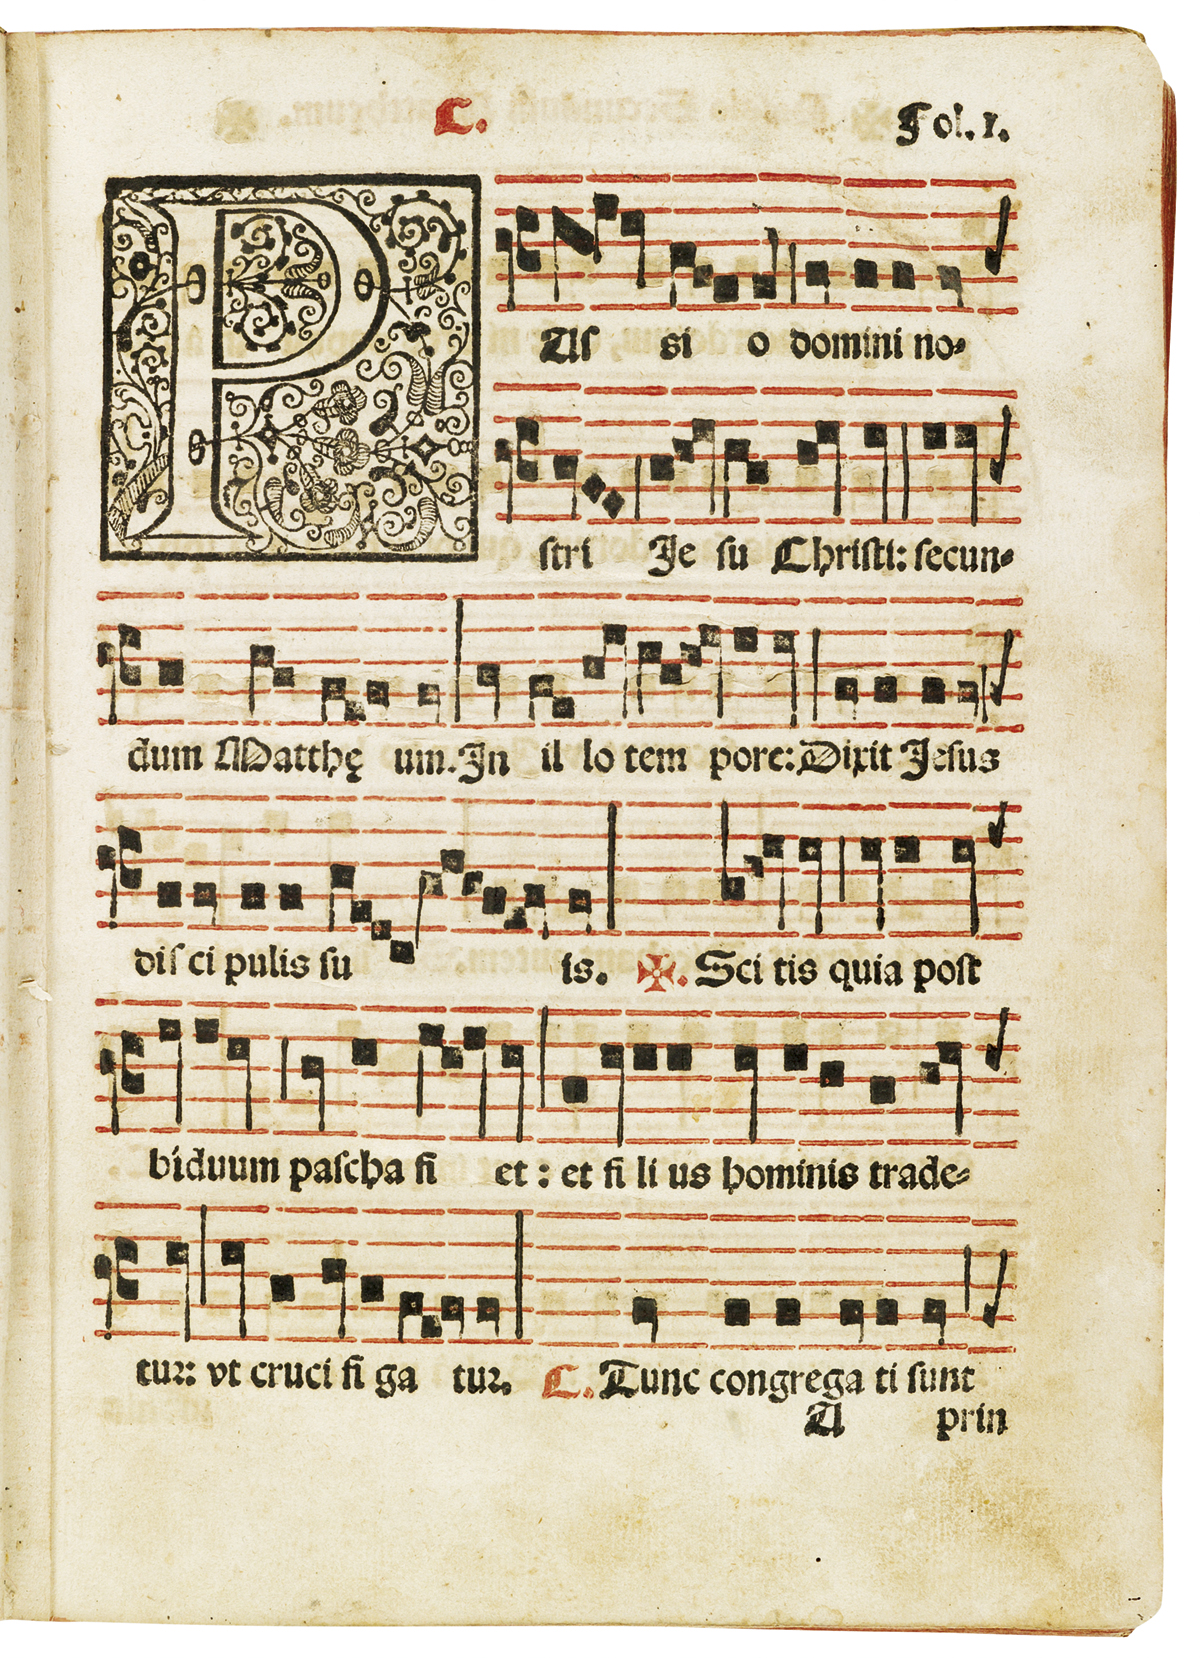 Folio 1r: staves printed in red, notation in black; blackletter text